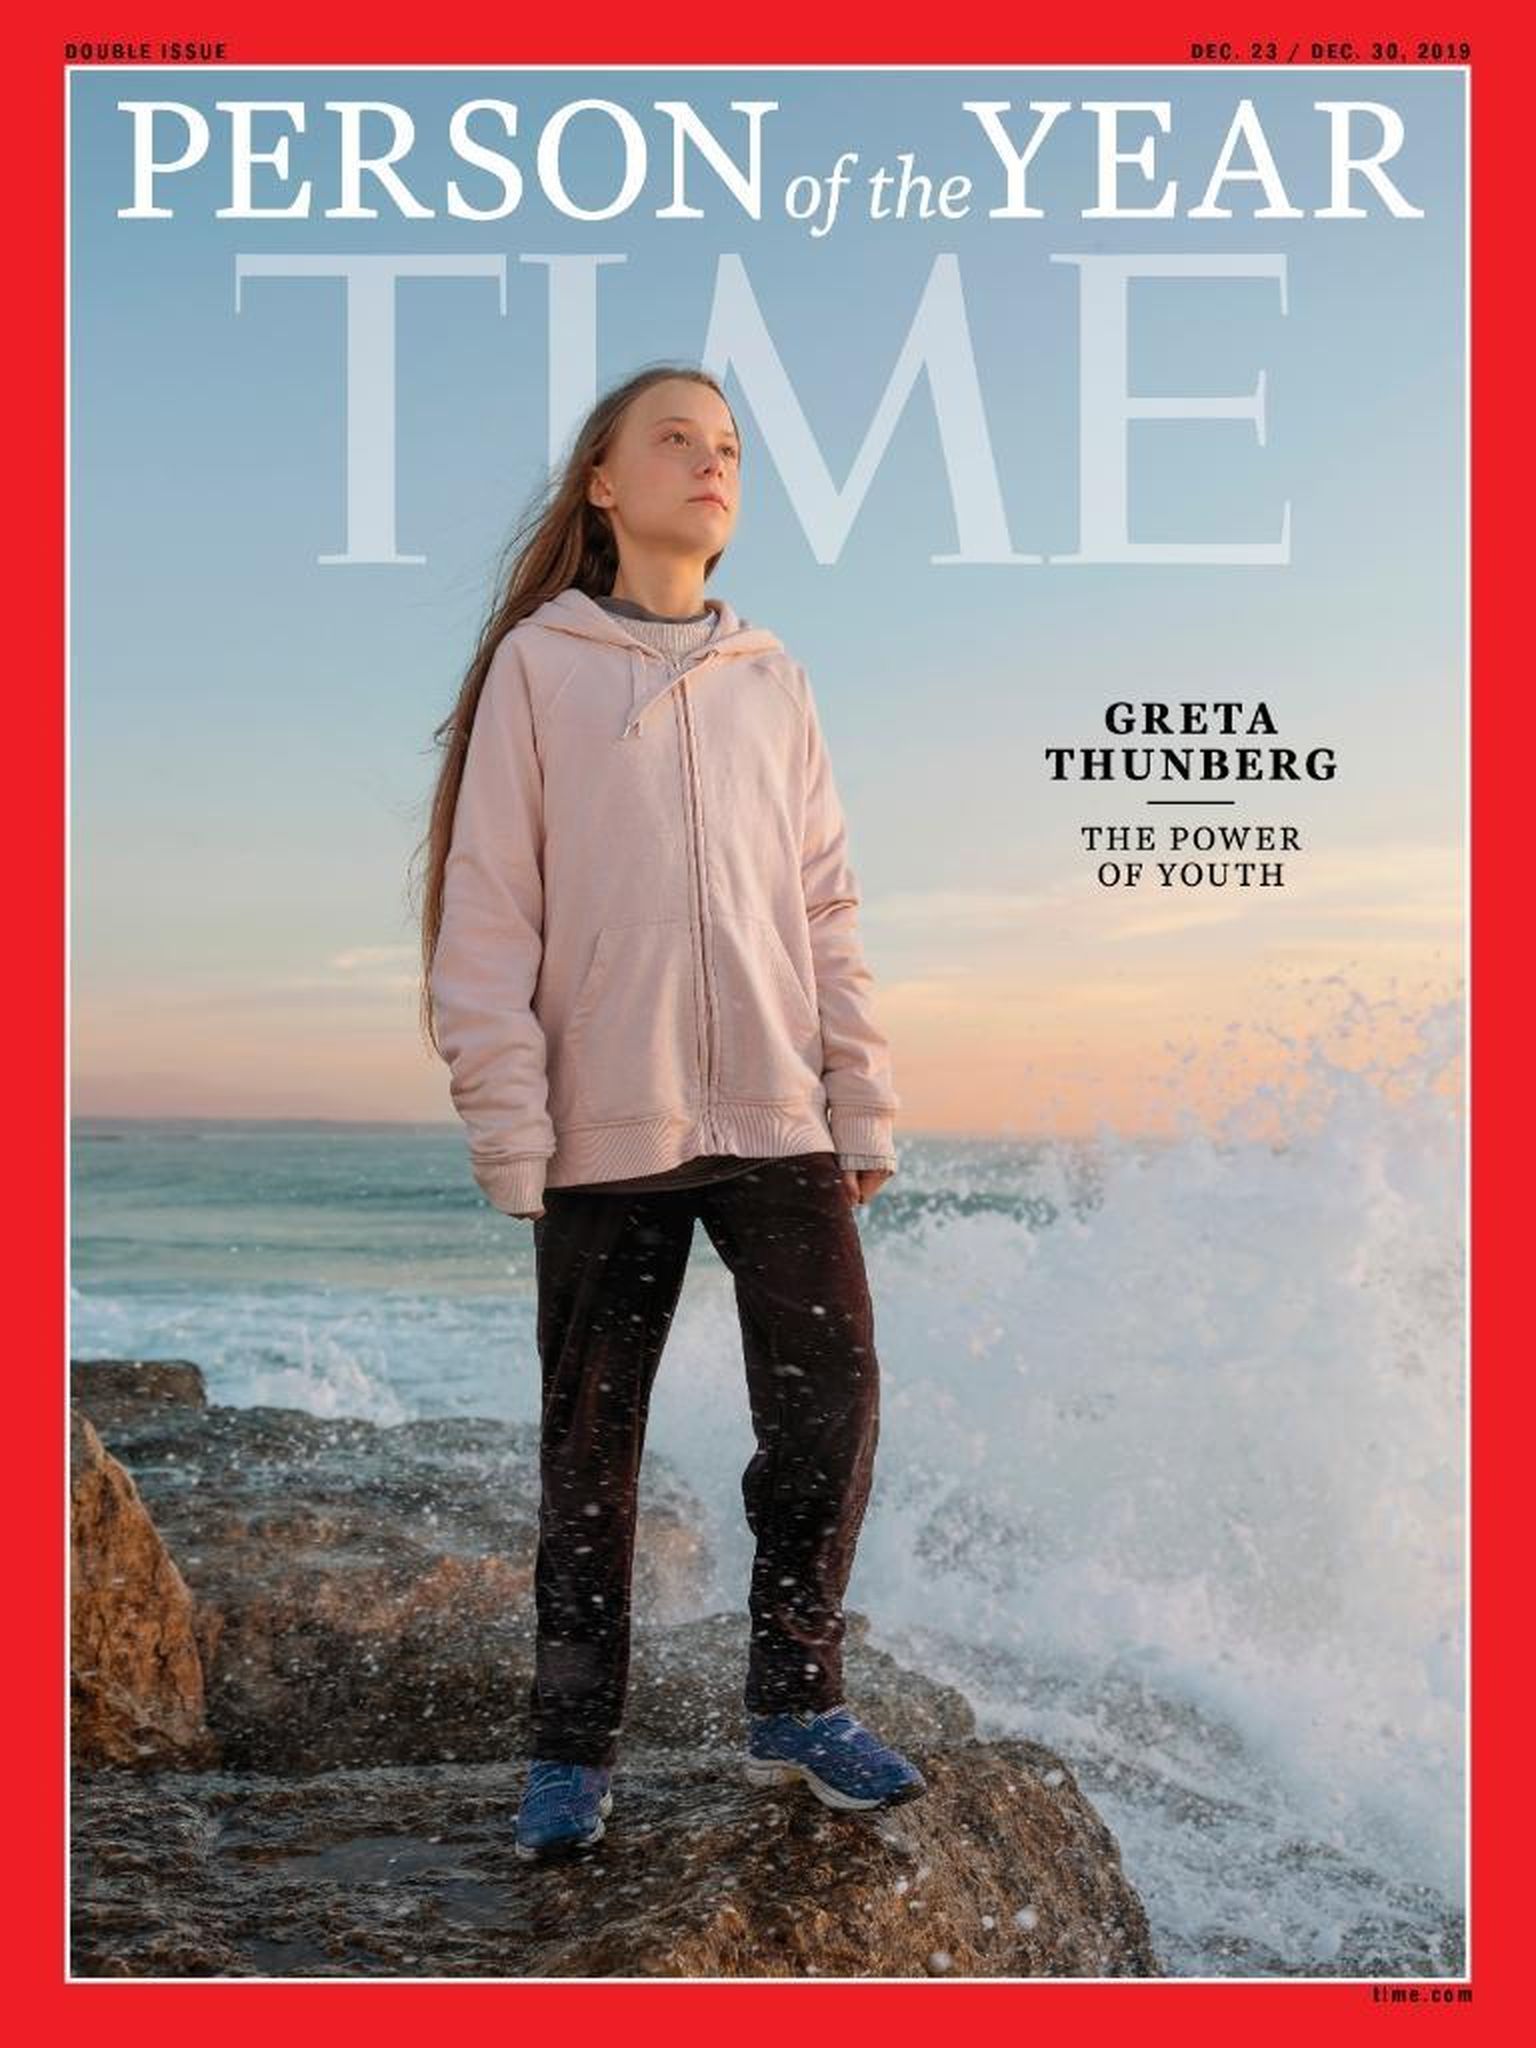 "Person of the year"